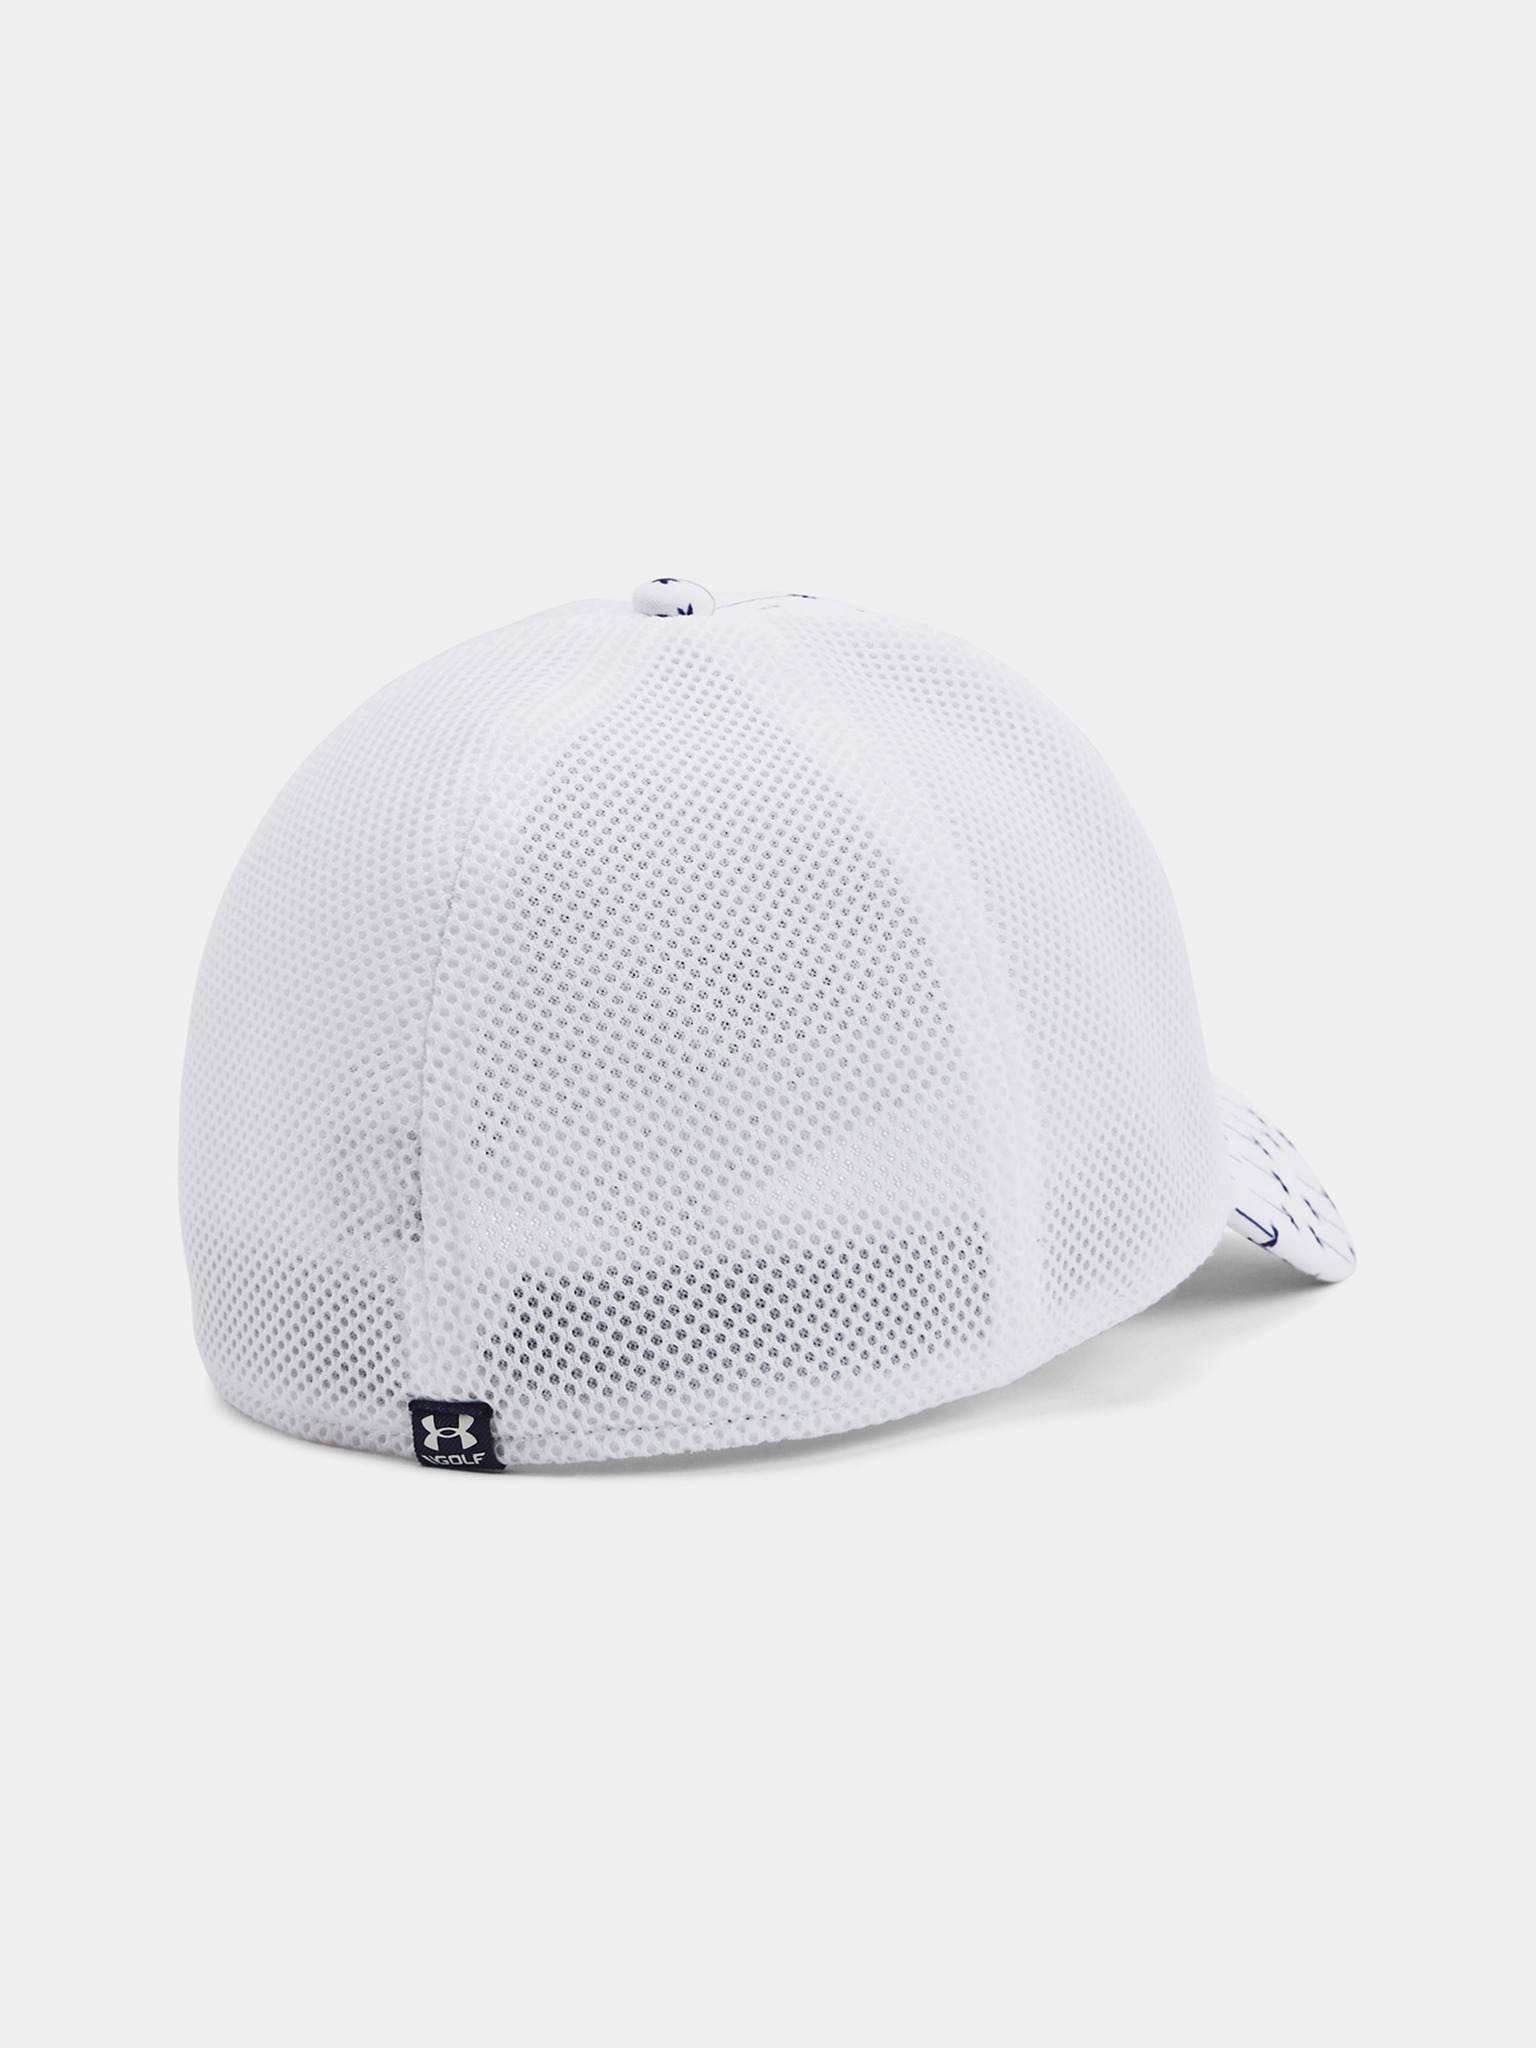 Under Armour - Iso-Chill Driver Mesh Cap